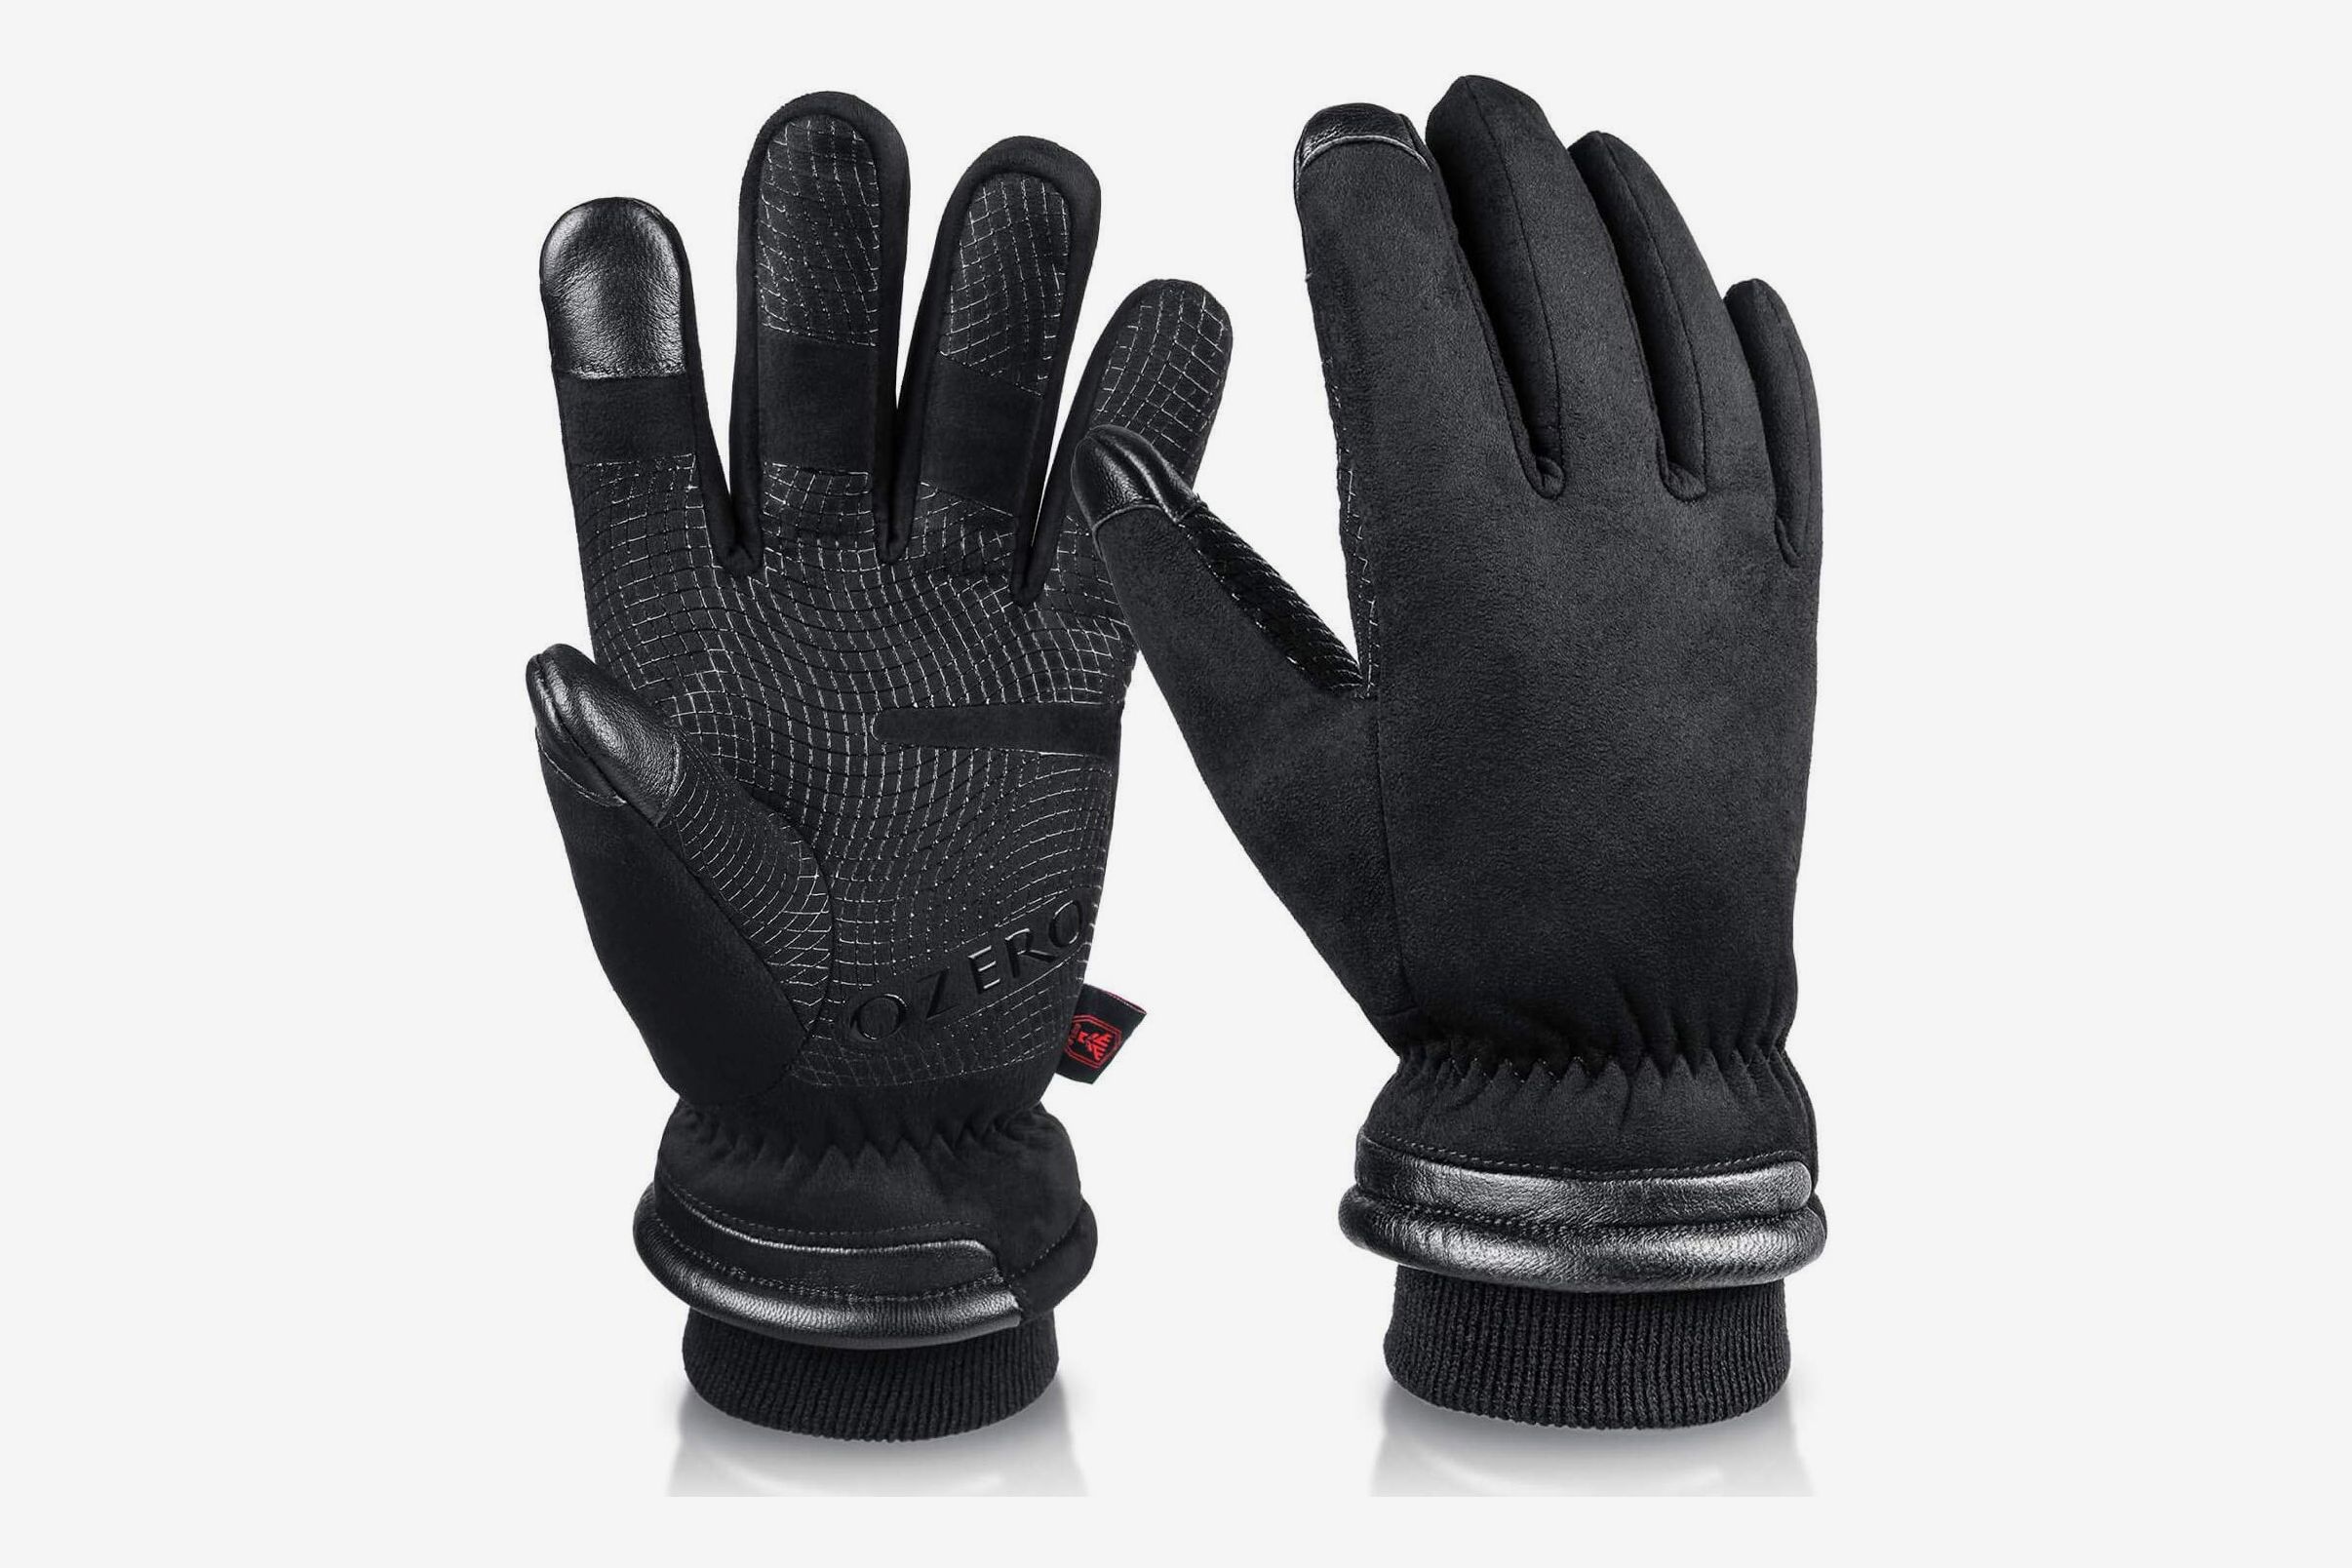 BBB Coldzone Winter Gloves New with Tags 